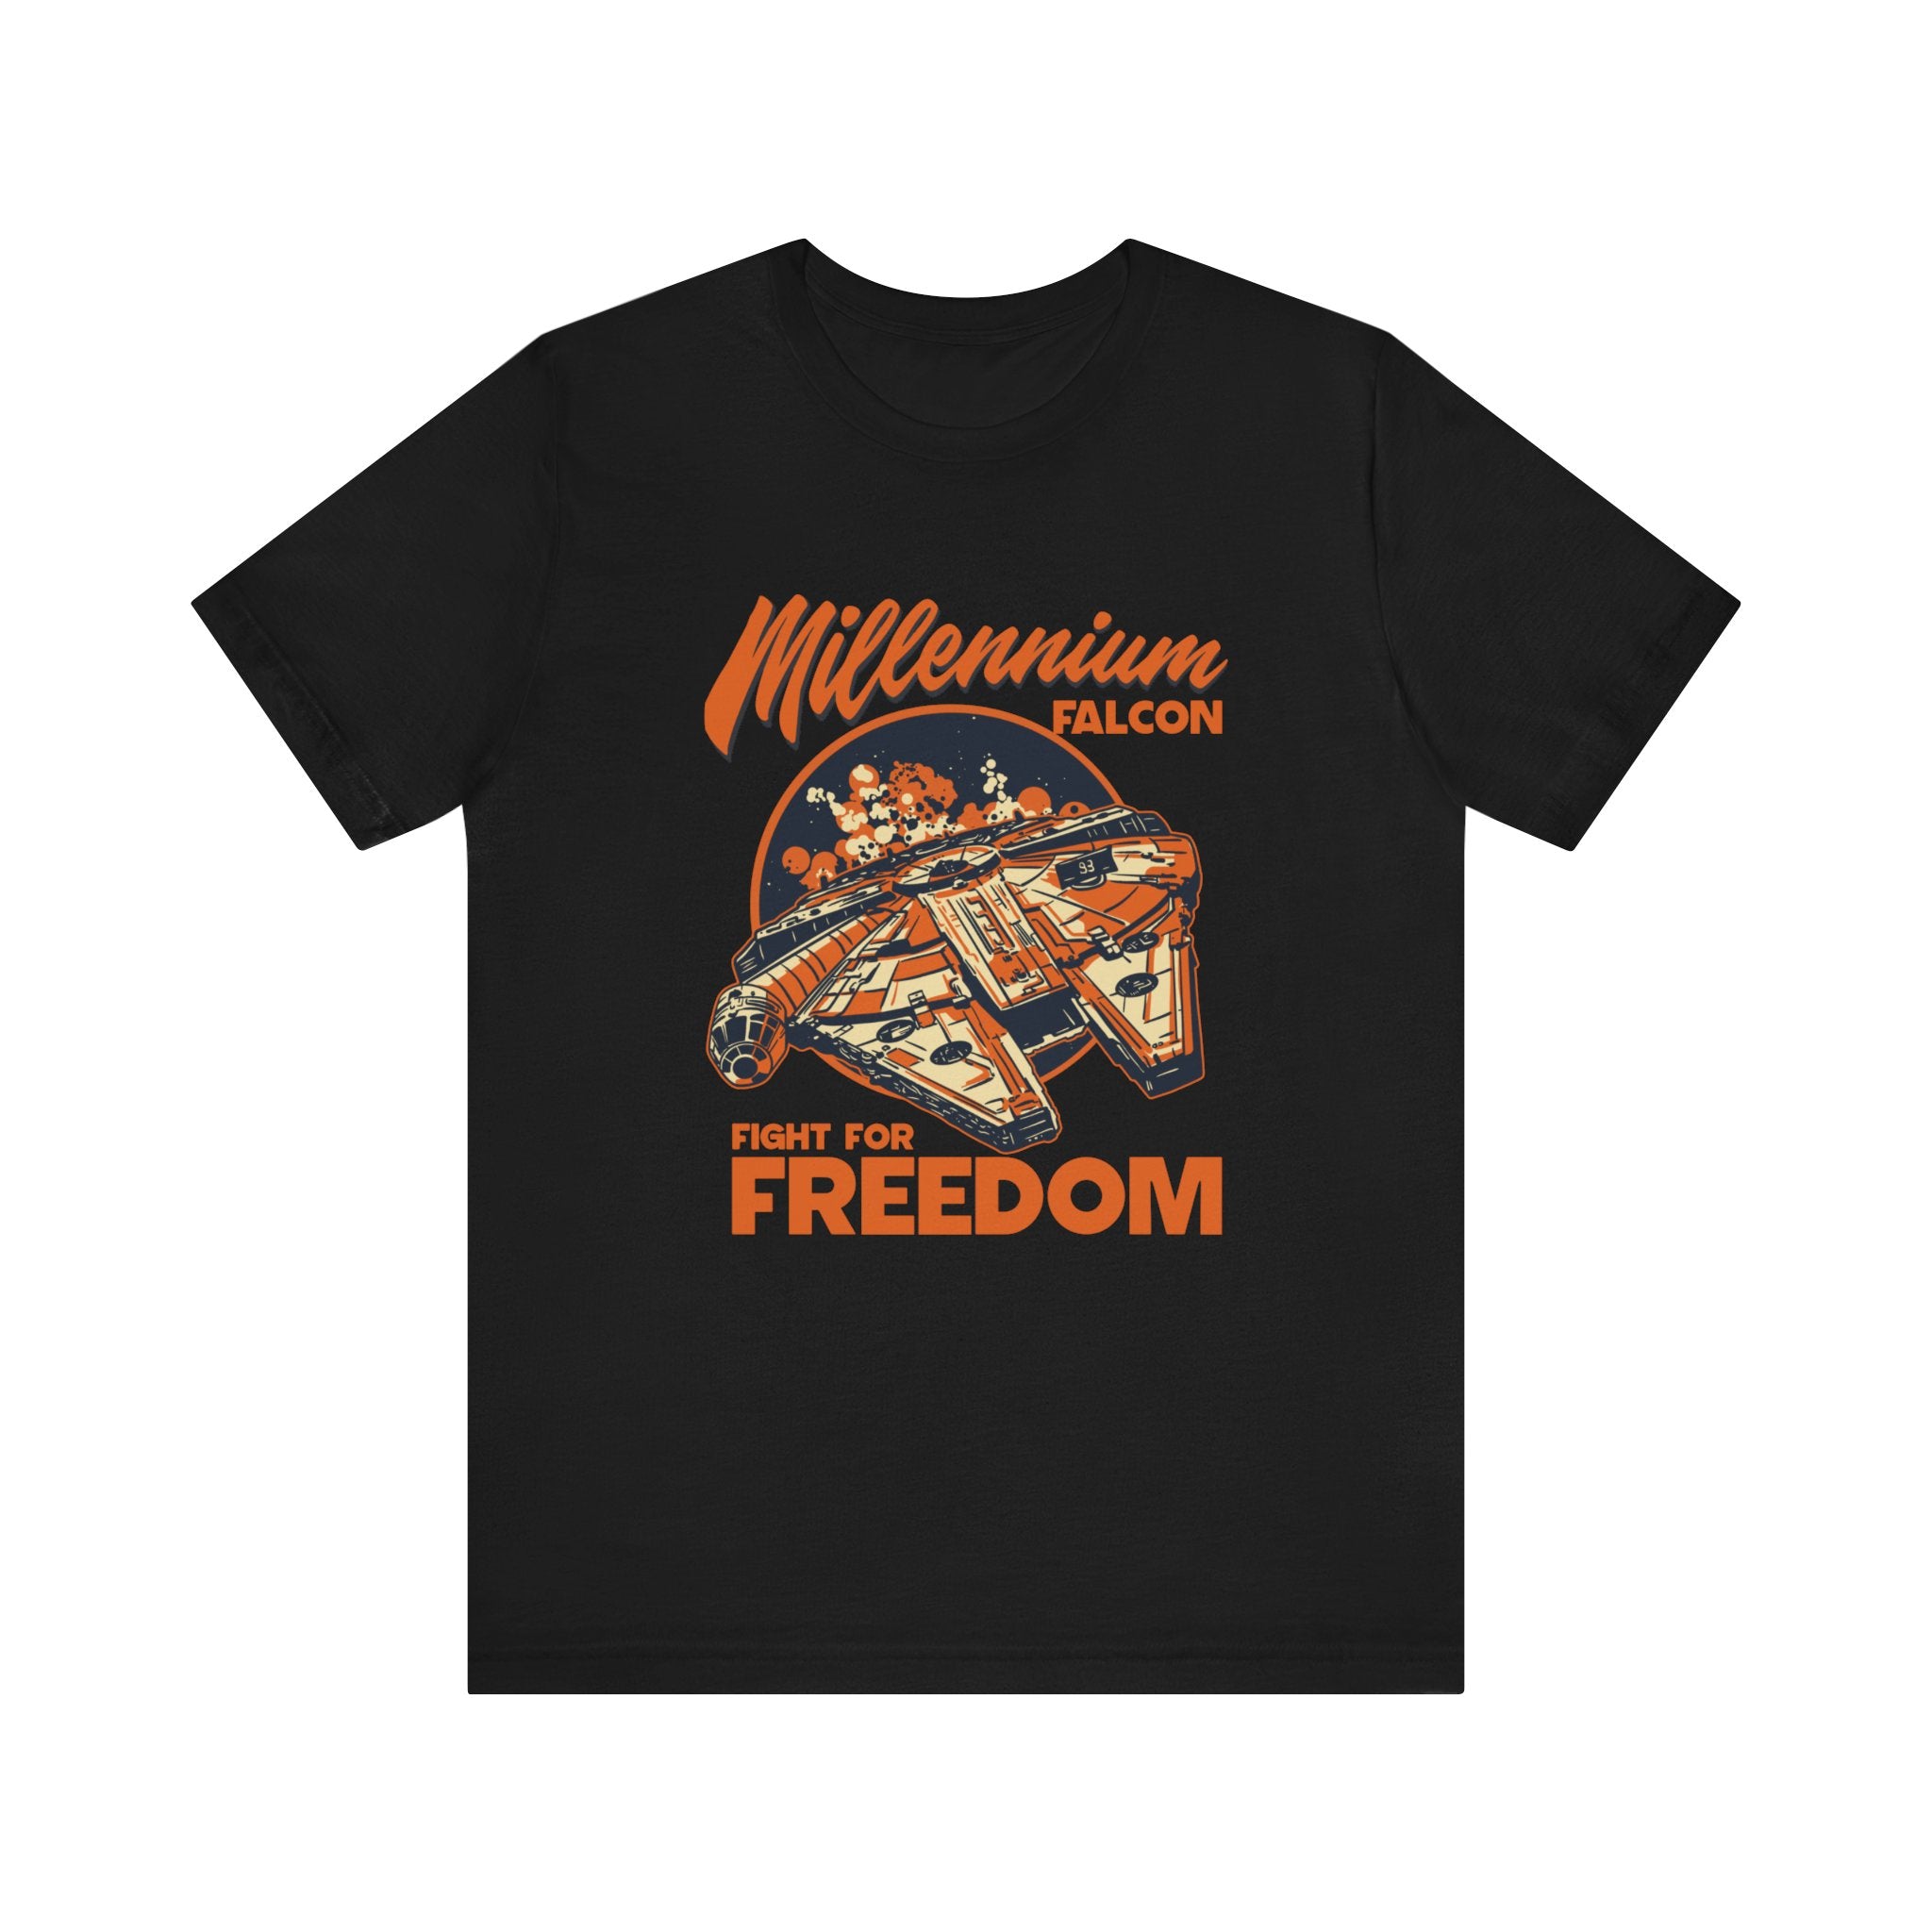 Black t-shirt made of soft cotton, featuring an orange and white graphic of the Falcon with the text "Falcon fight for freedom.